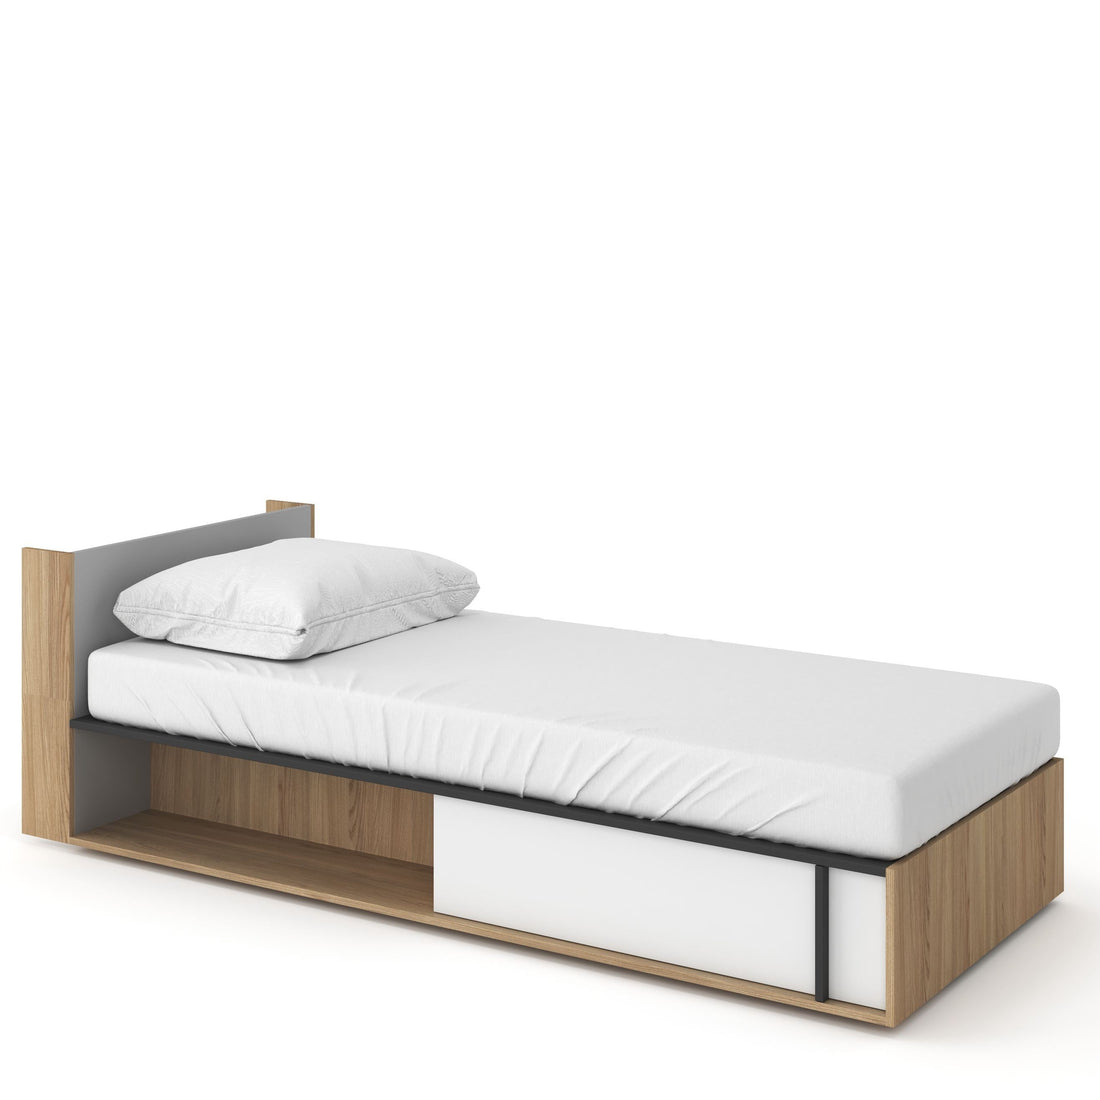 Imola IM-15 Bed with Mattress - £347.4 - Kids Single Bed 